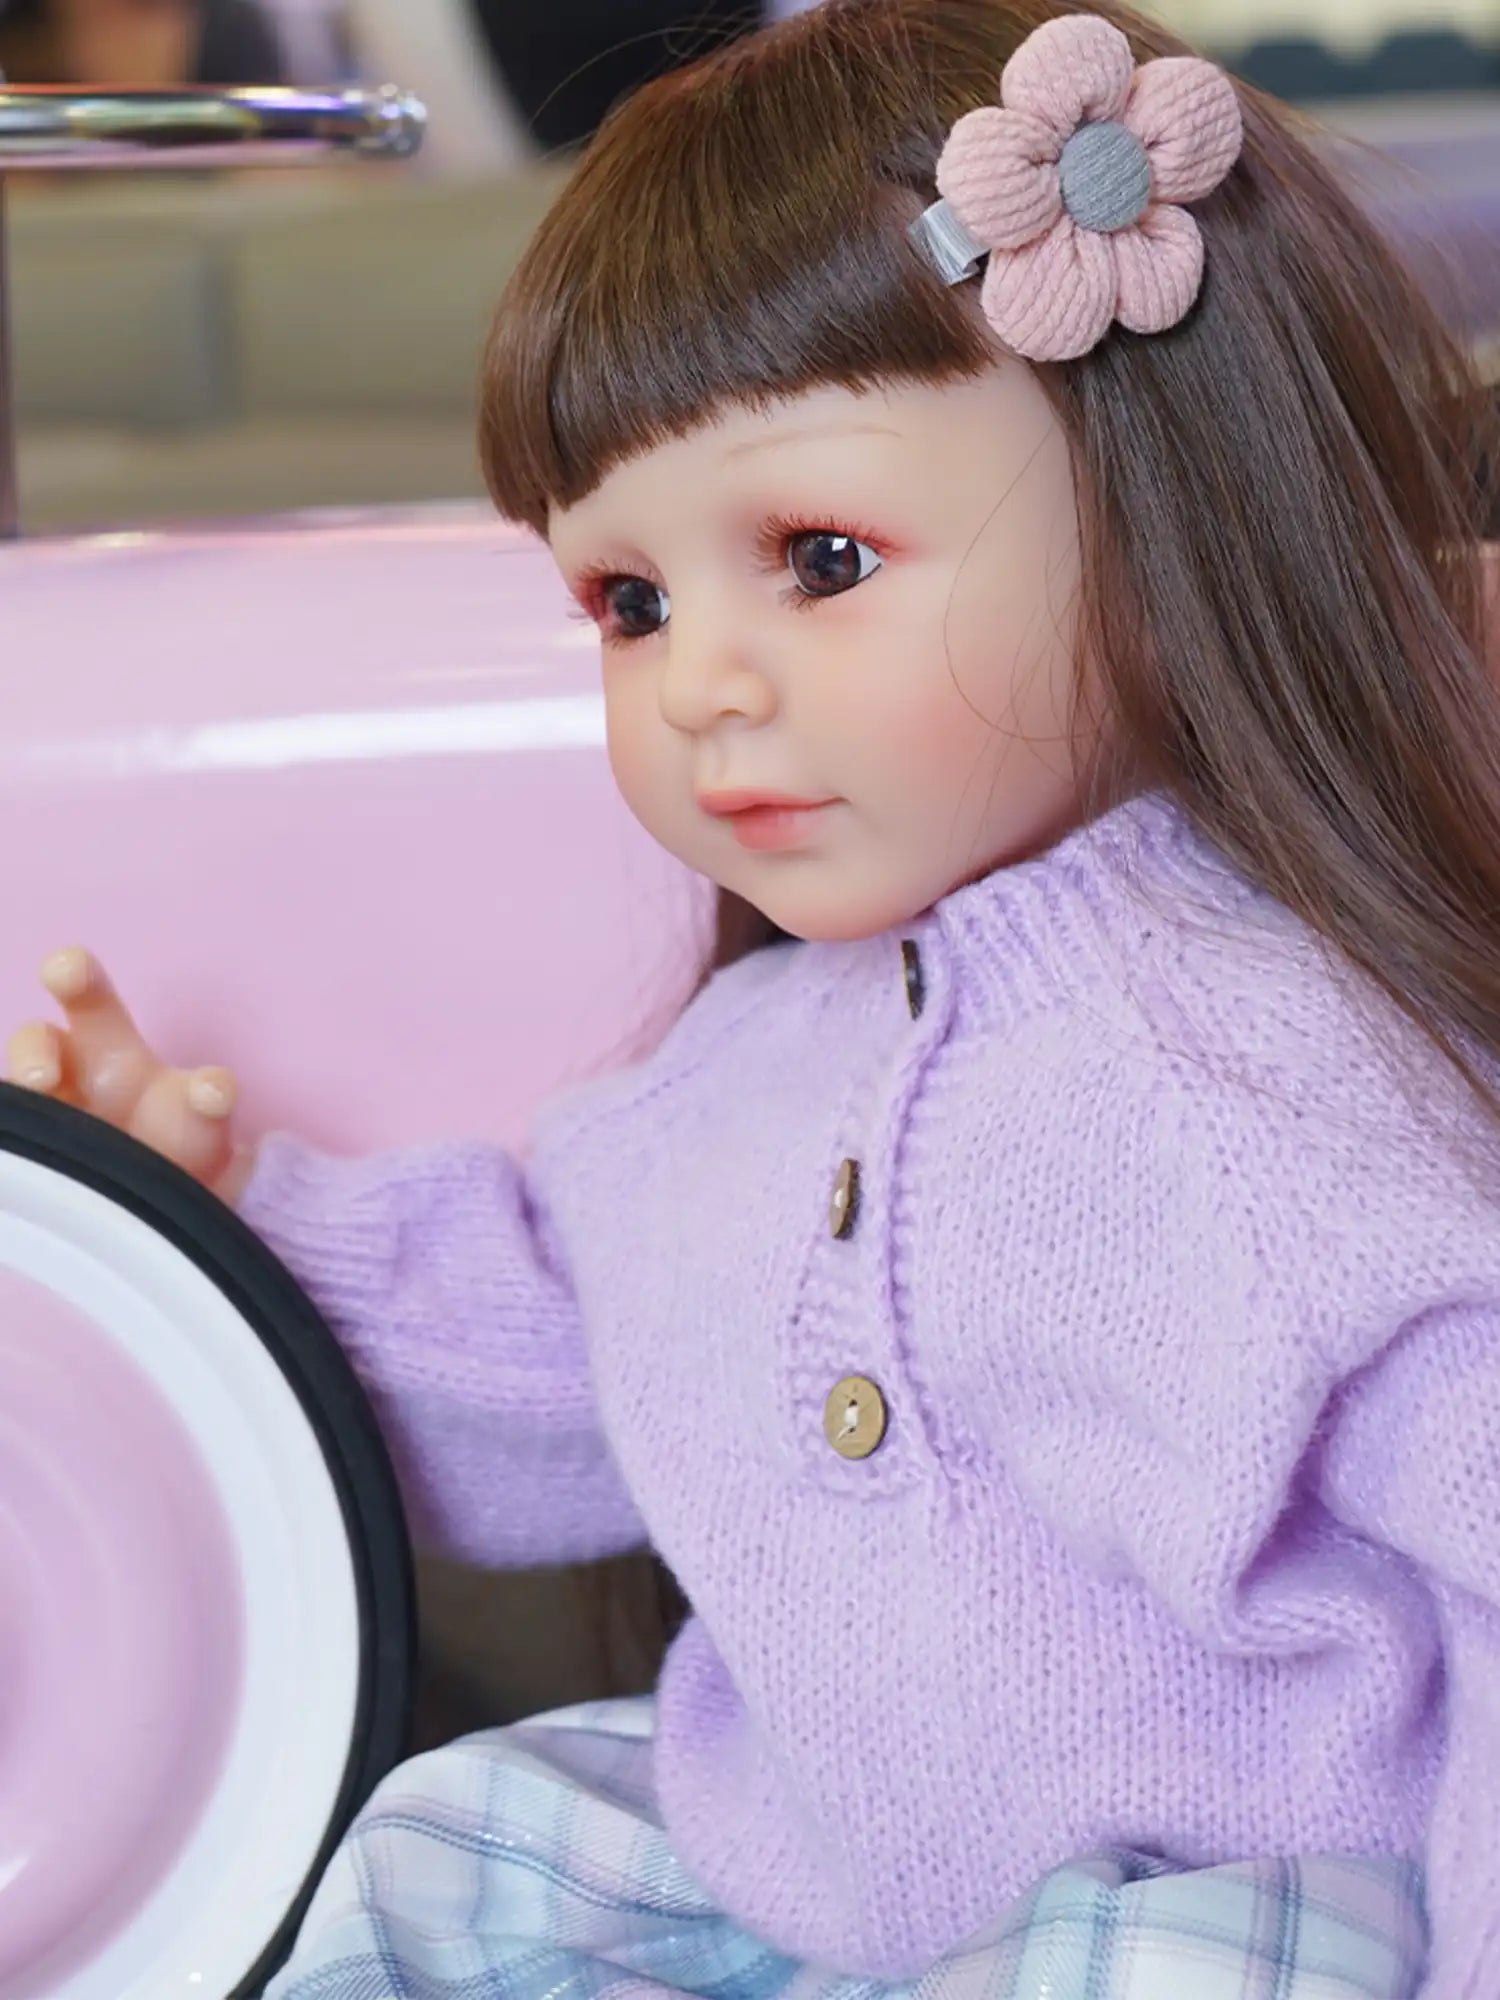 Realistic child doll with sparkling eyes, wearing a cozy purple sweater and checkered skirt, seated indoors.